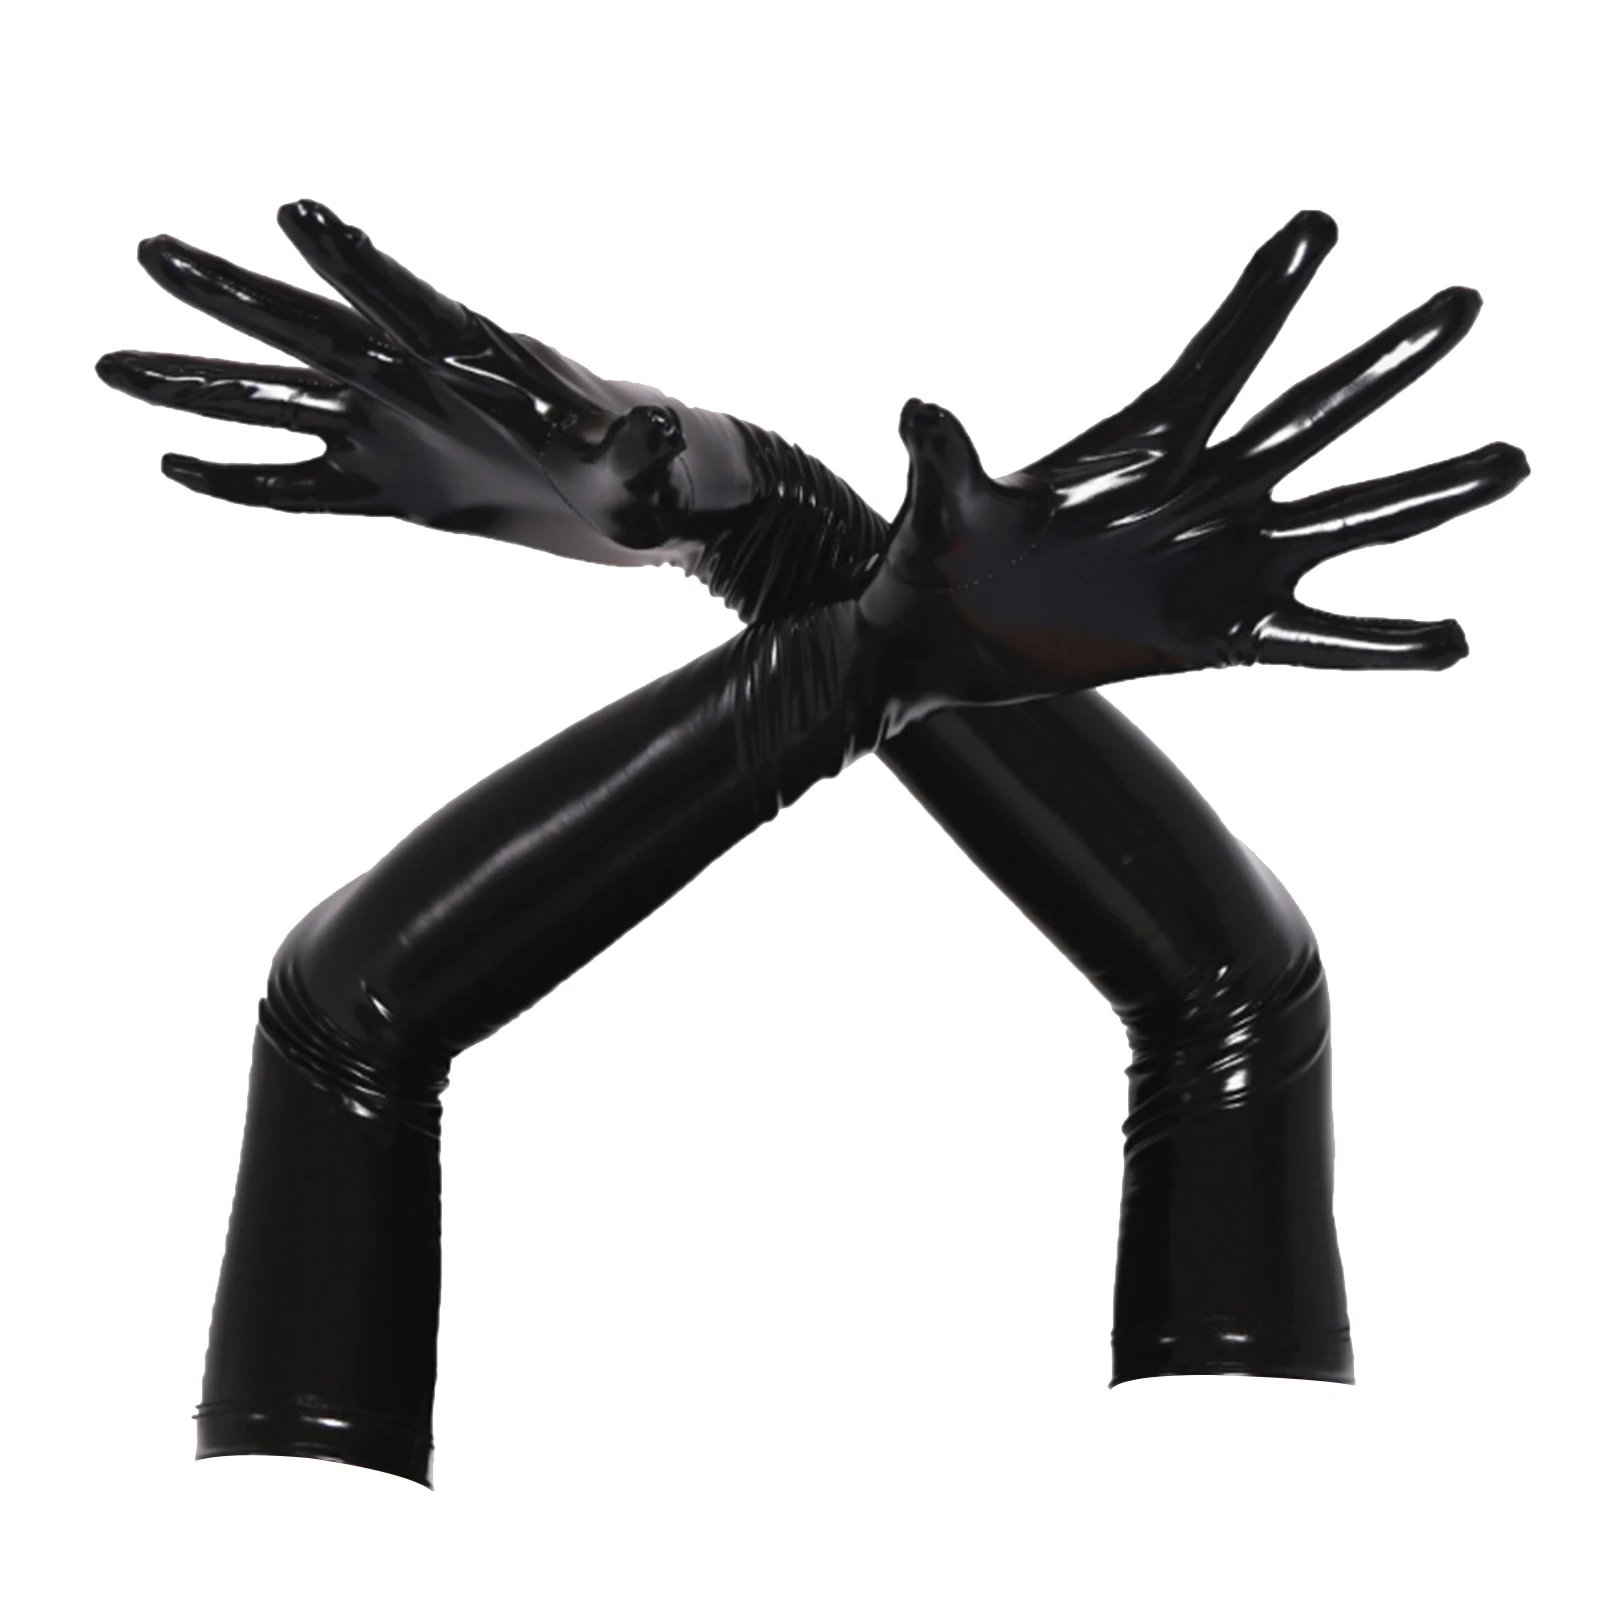 Women Fashion Shiny Leather Long Gloves Wet Look Glossy Mittens Clothes Accessories Party Club Stage Performance Costume Fitting